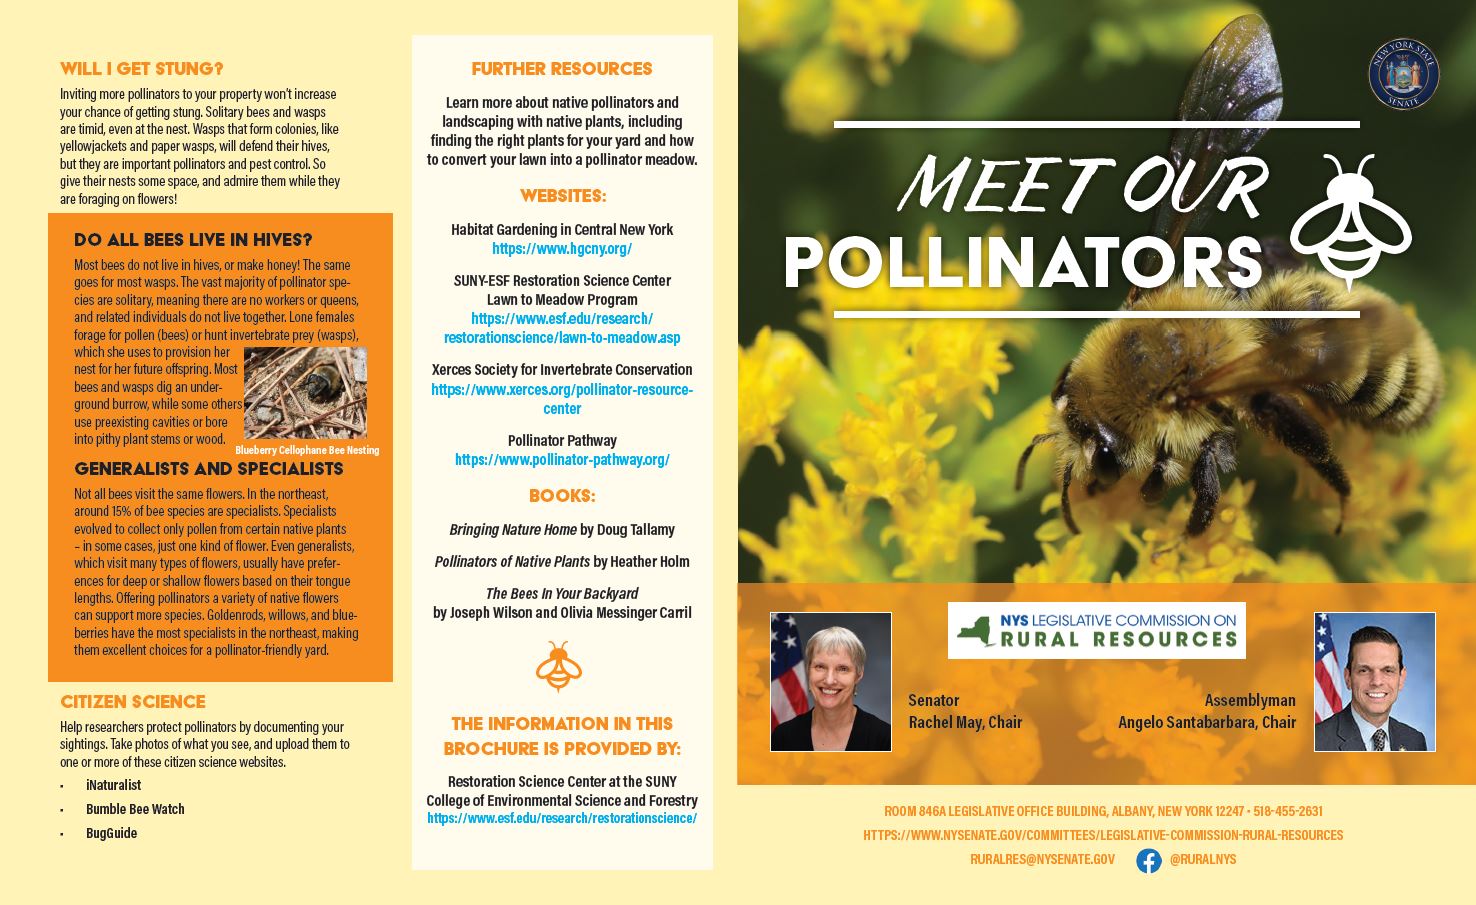 screenshot of brochure created by restoration science center, entitled "Meet Our Pollinators"